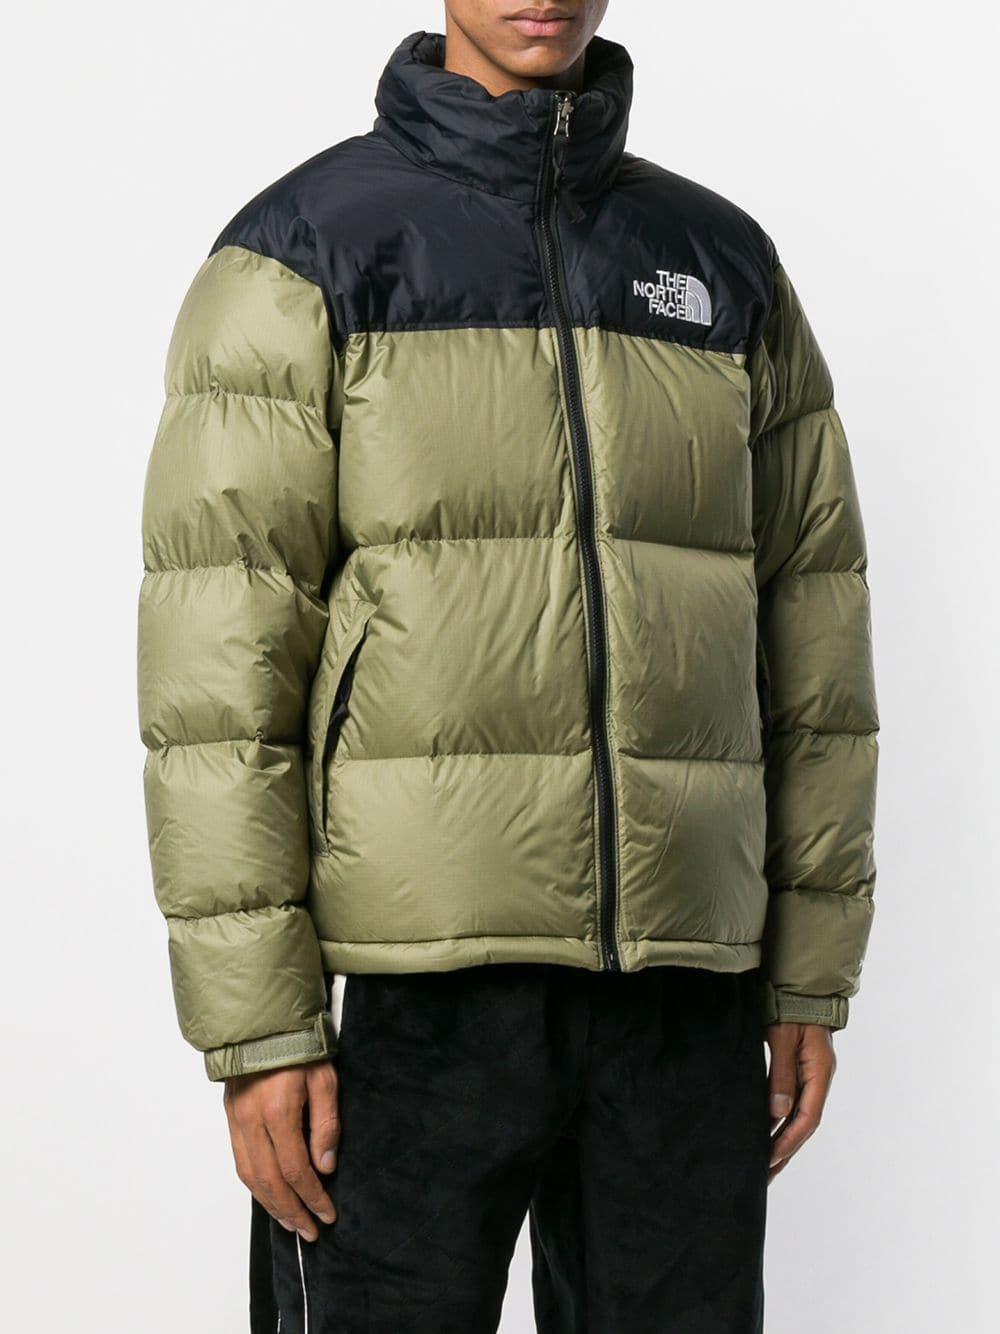 The North Face 1996 Retro Nuptse Jacket in Green for Men - Lyst